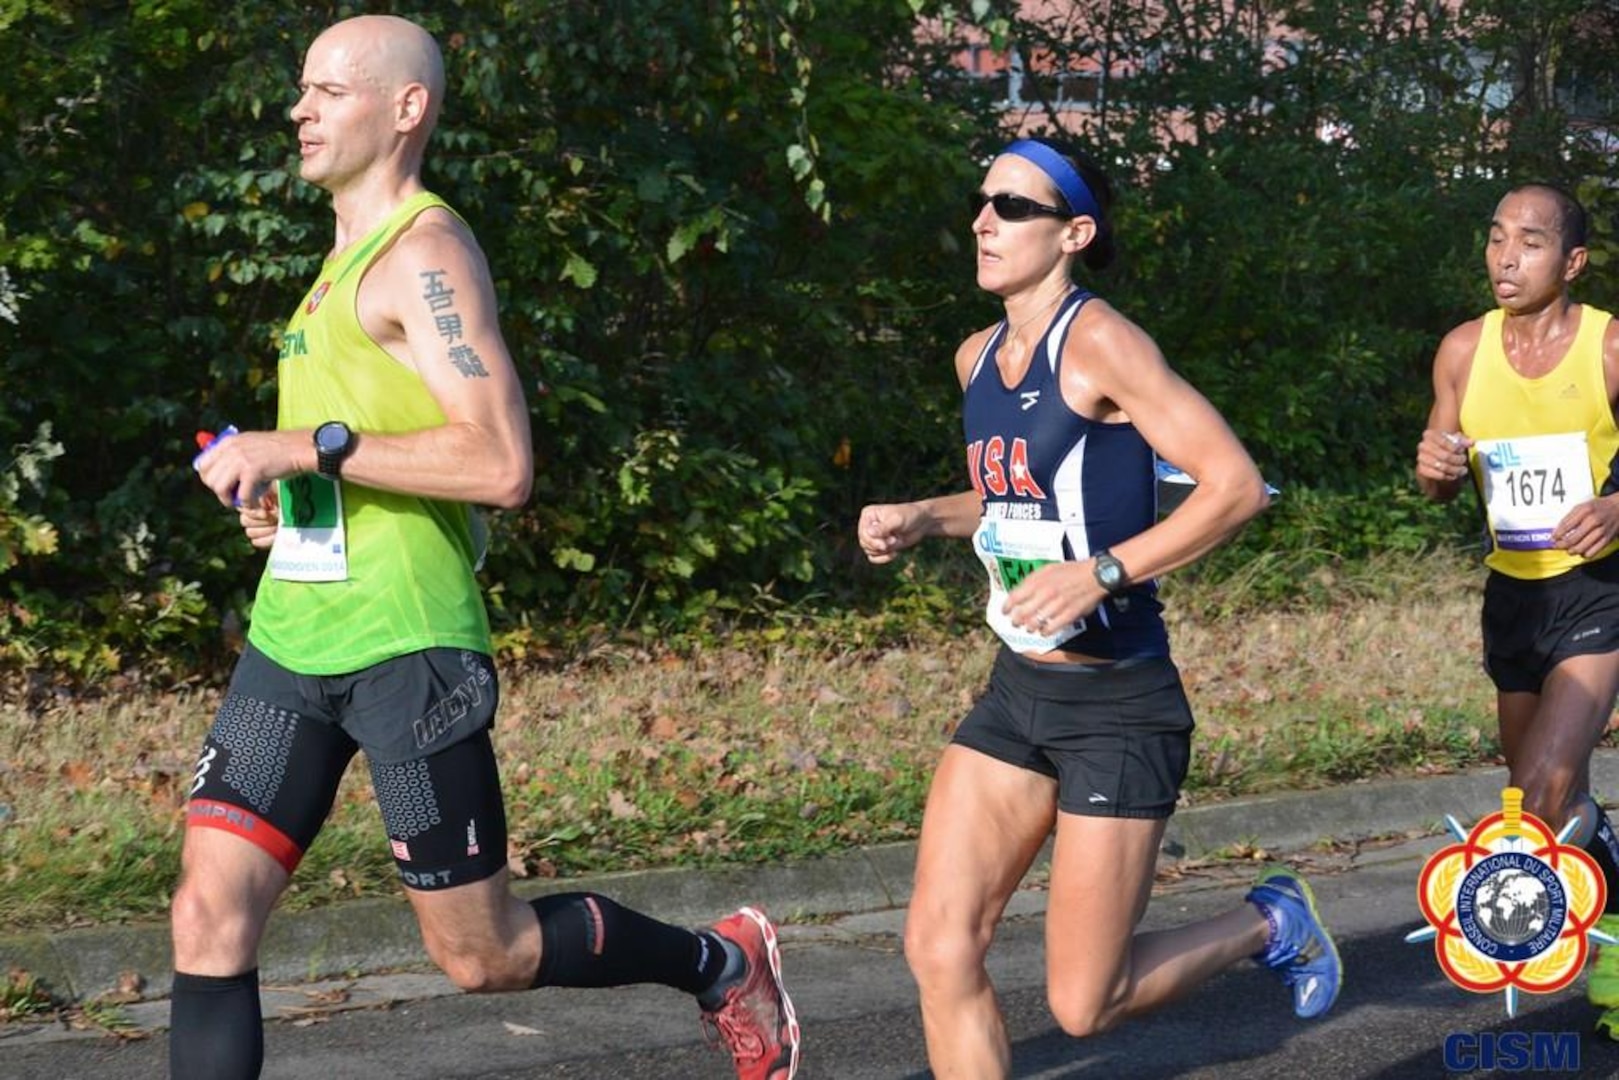 Navy LT Gina Slaby leads the US Women and placing 4th overall in the CISM Women's Division.  Slaby finished with a time of 2:43:57 during the 46th CISM Marathon World Military Championship 9-14 October 2014 in Eindhoven, Netherlands.